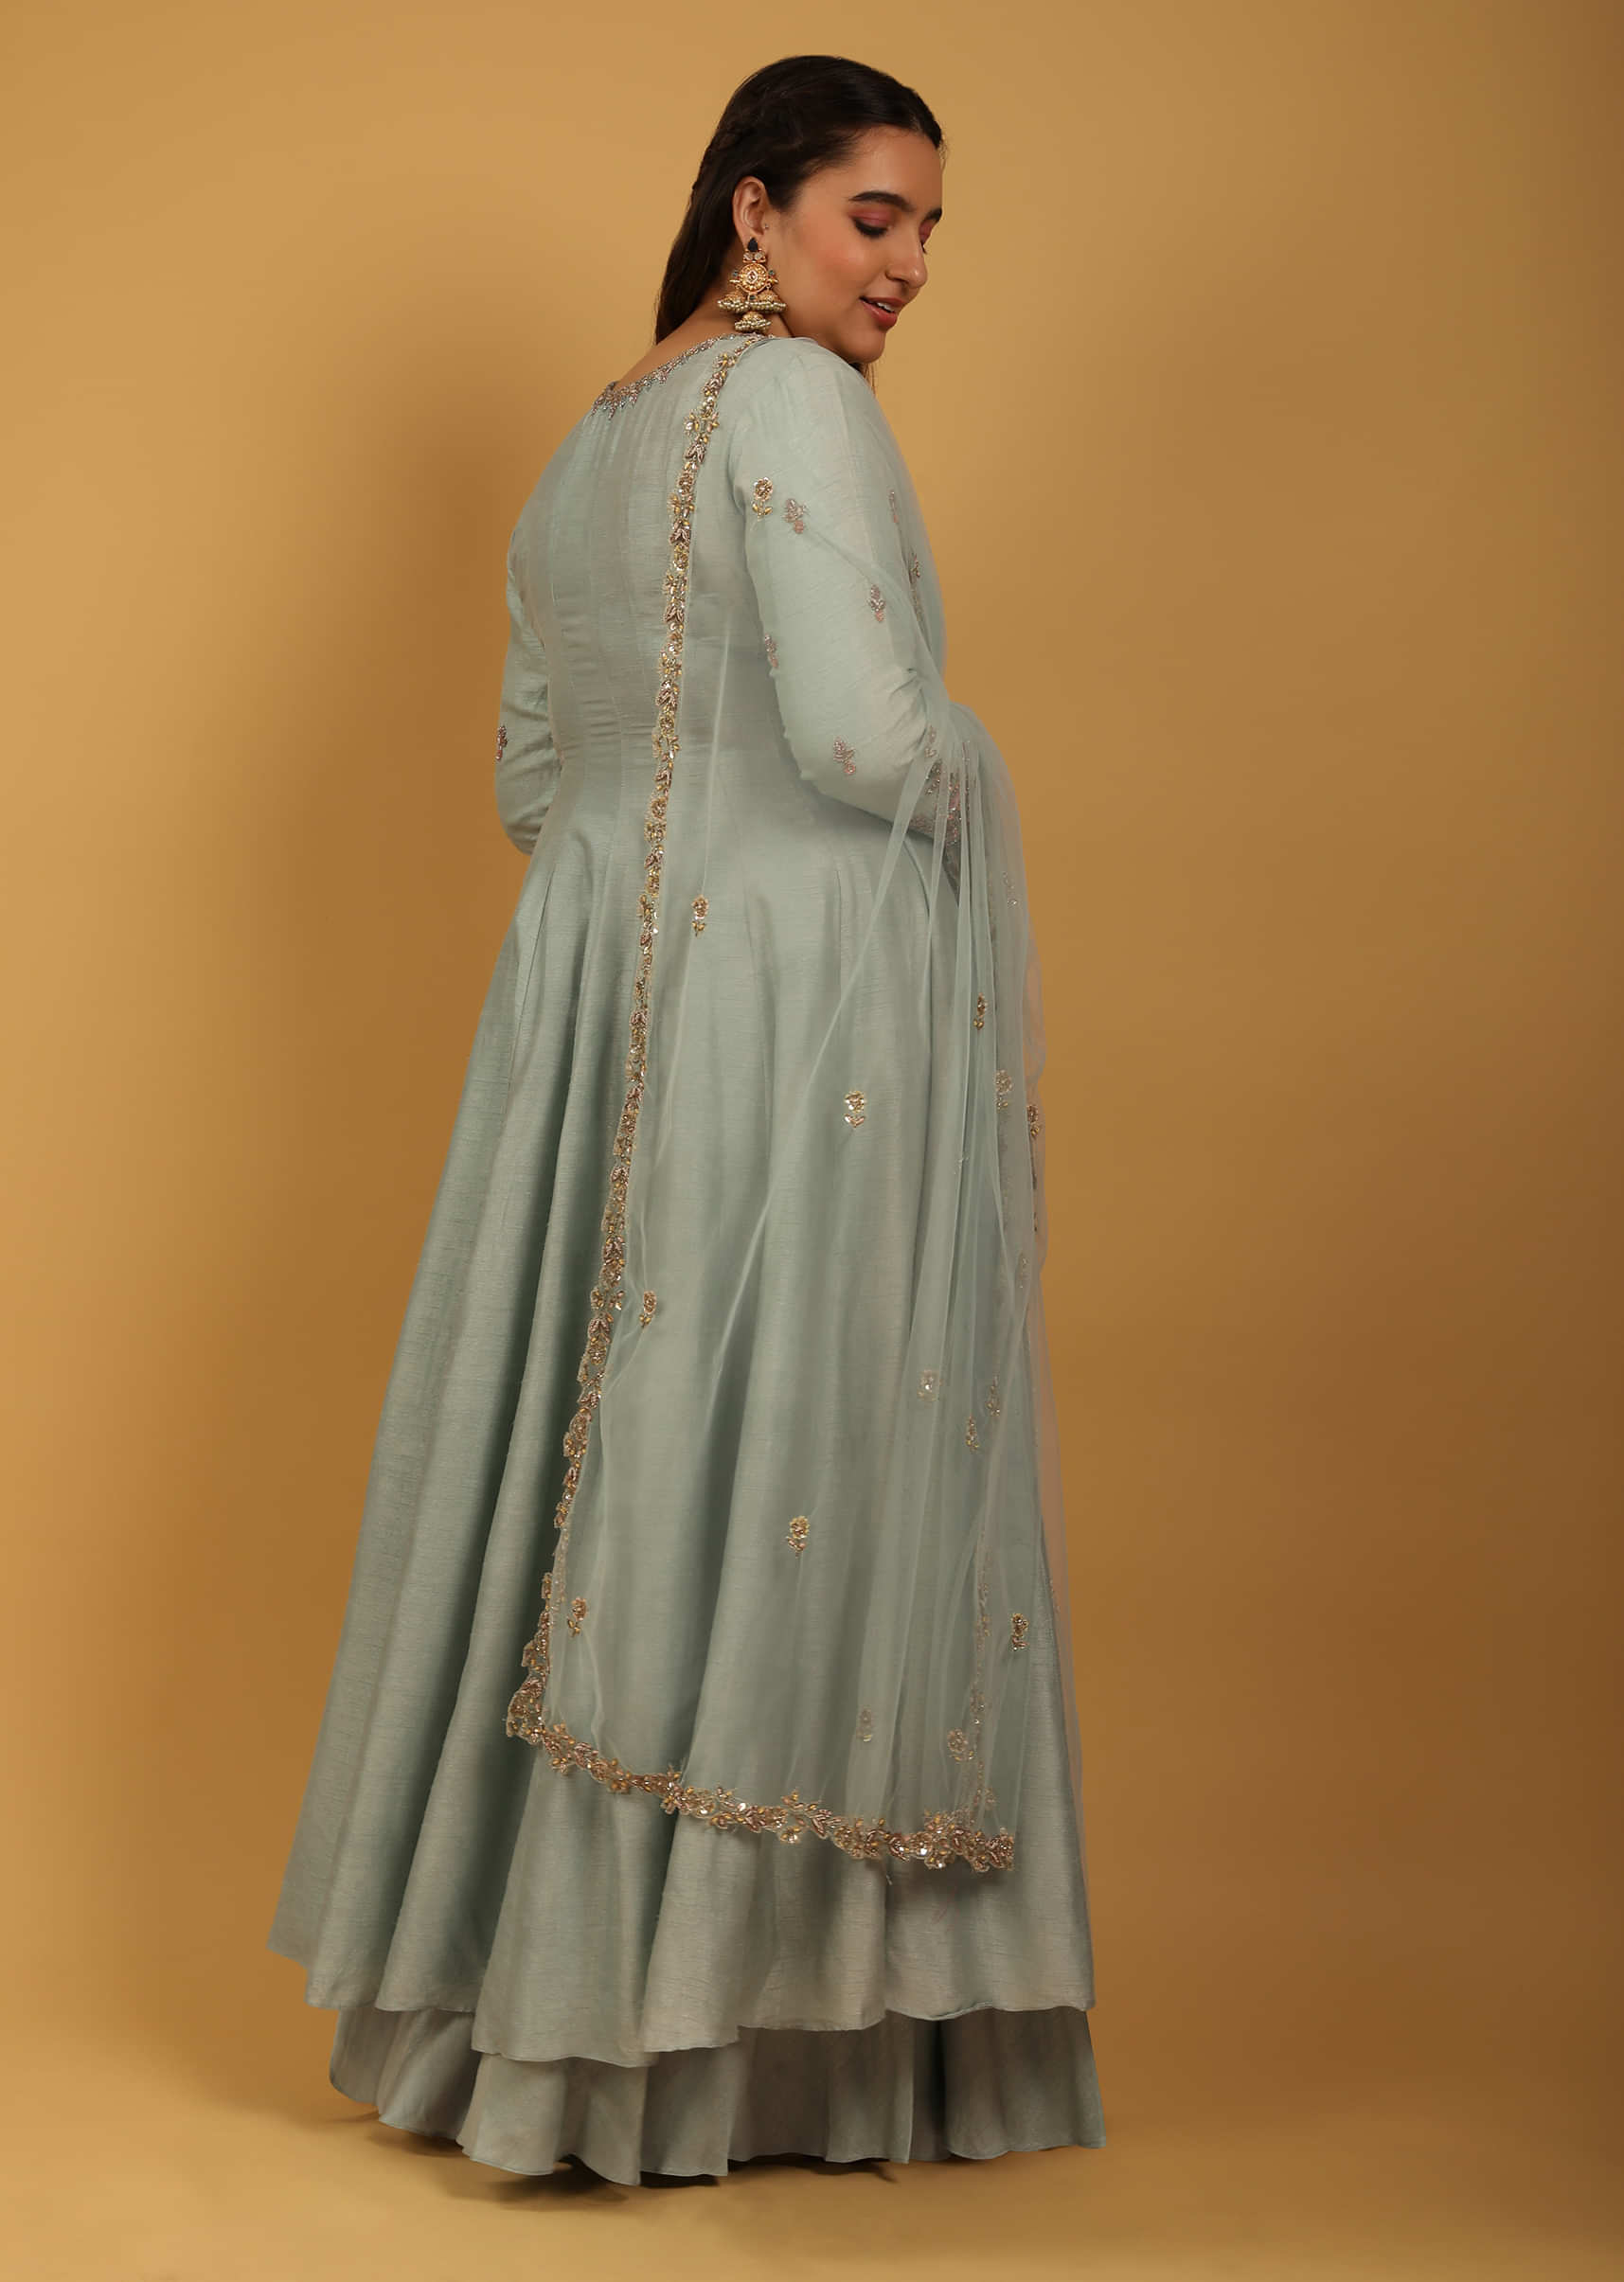 Sage Green Anarkali And Palazzo Suit In Raw Silk With Multi Colored Sequins And Cut Dana Embroidery On The Sleeves And Placket  